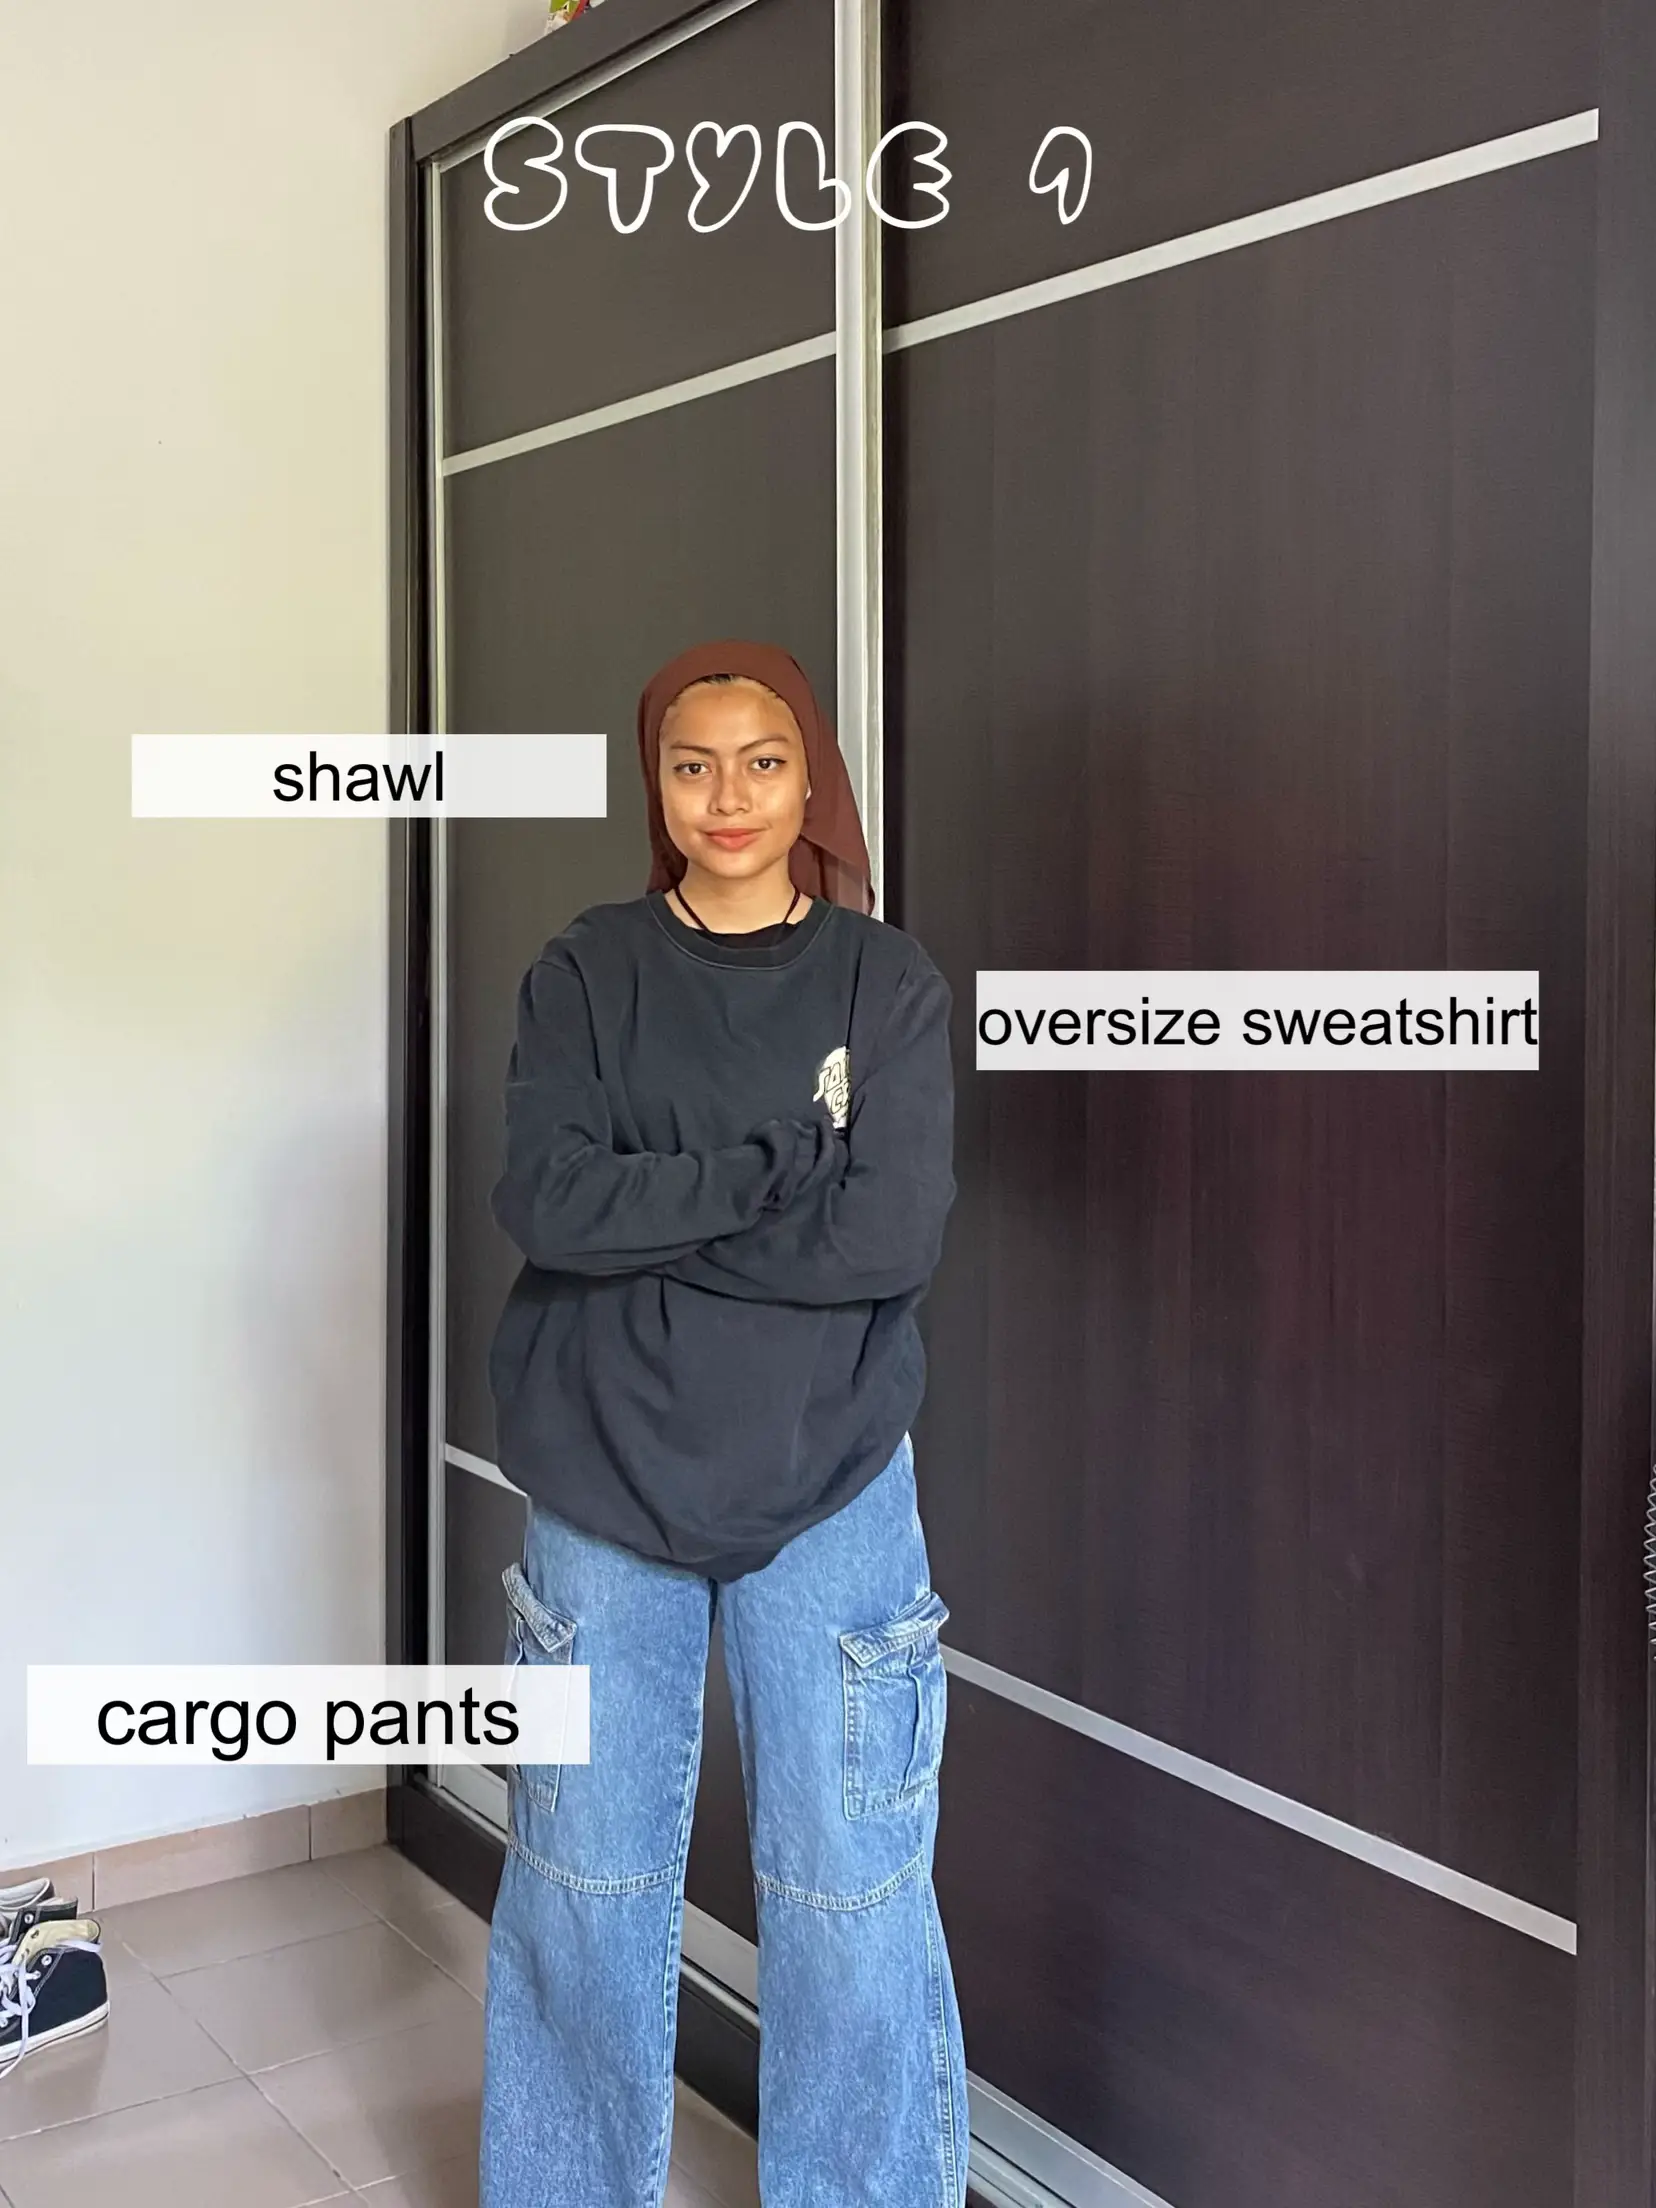 how to style cargo pants | Gallery posted by nrlsywni | Lemon8